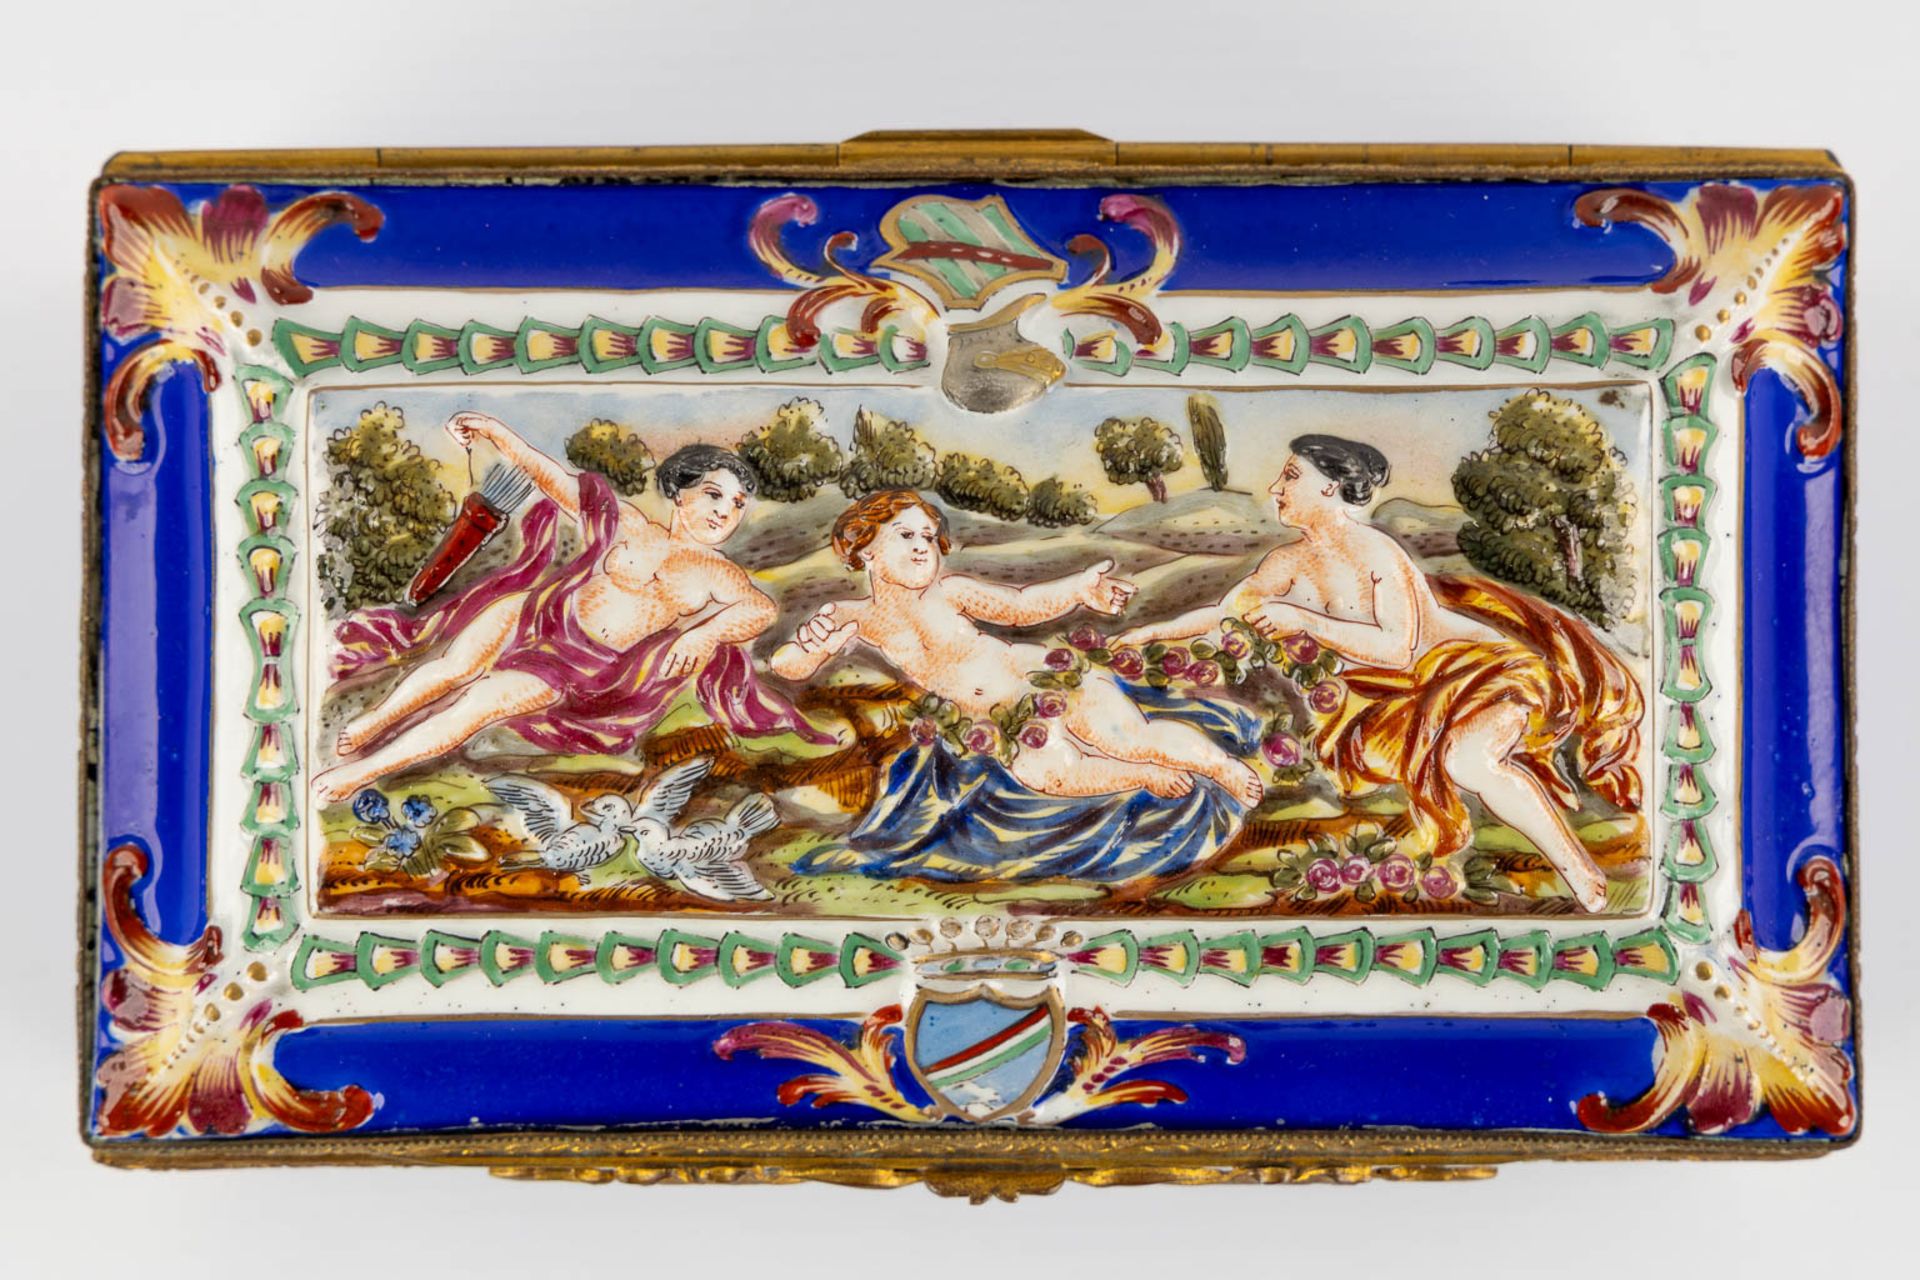 Capodimonte, a finely made porcelain jewellery box. 19th C. (L:10 x W:19 x H:7 cm) - Image 8 of 12